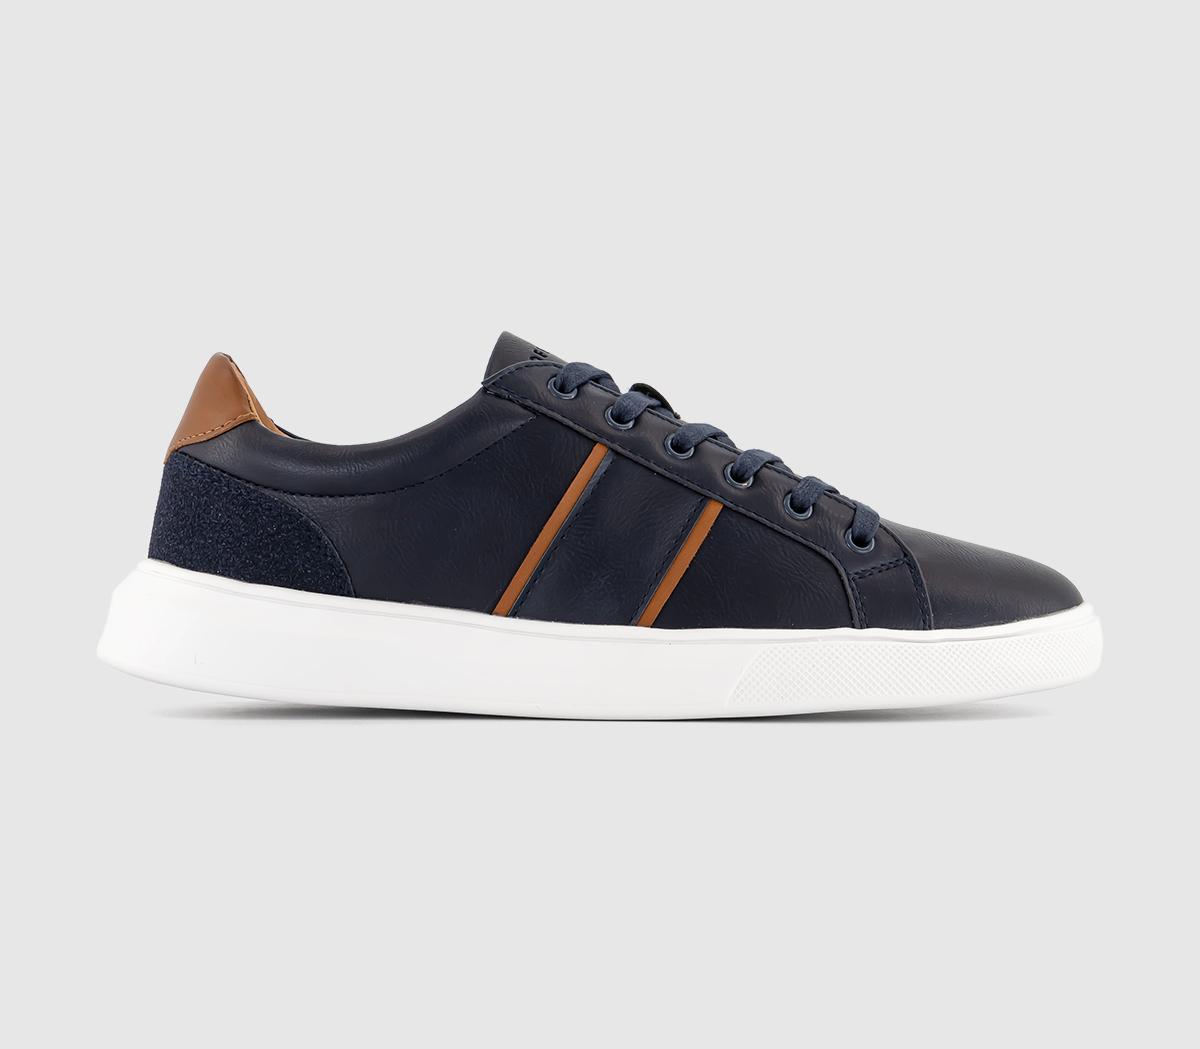 OFFICE Cade Side Stripe Trainers Navy - Men's Casual Shoes